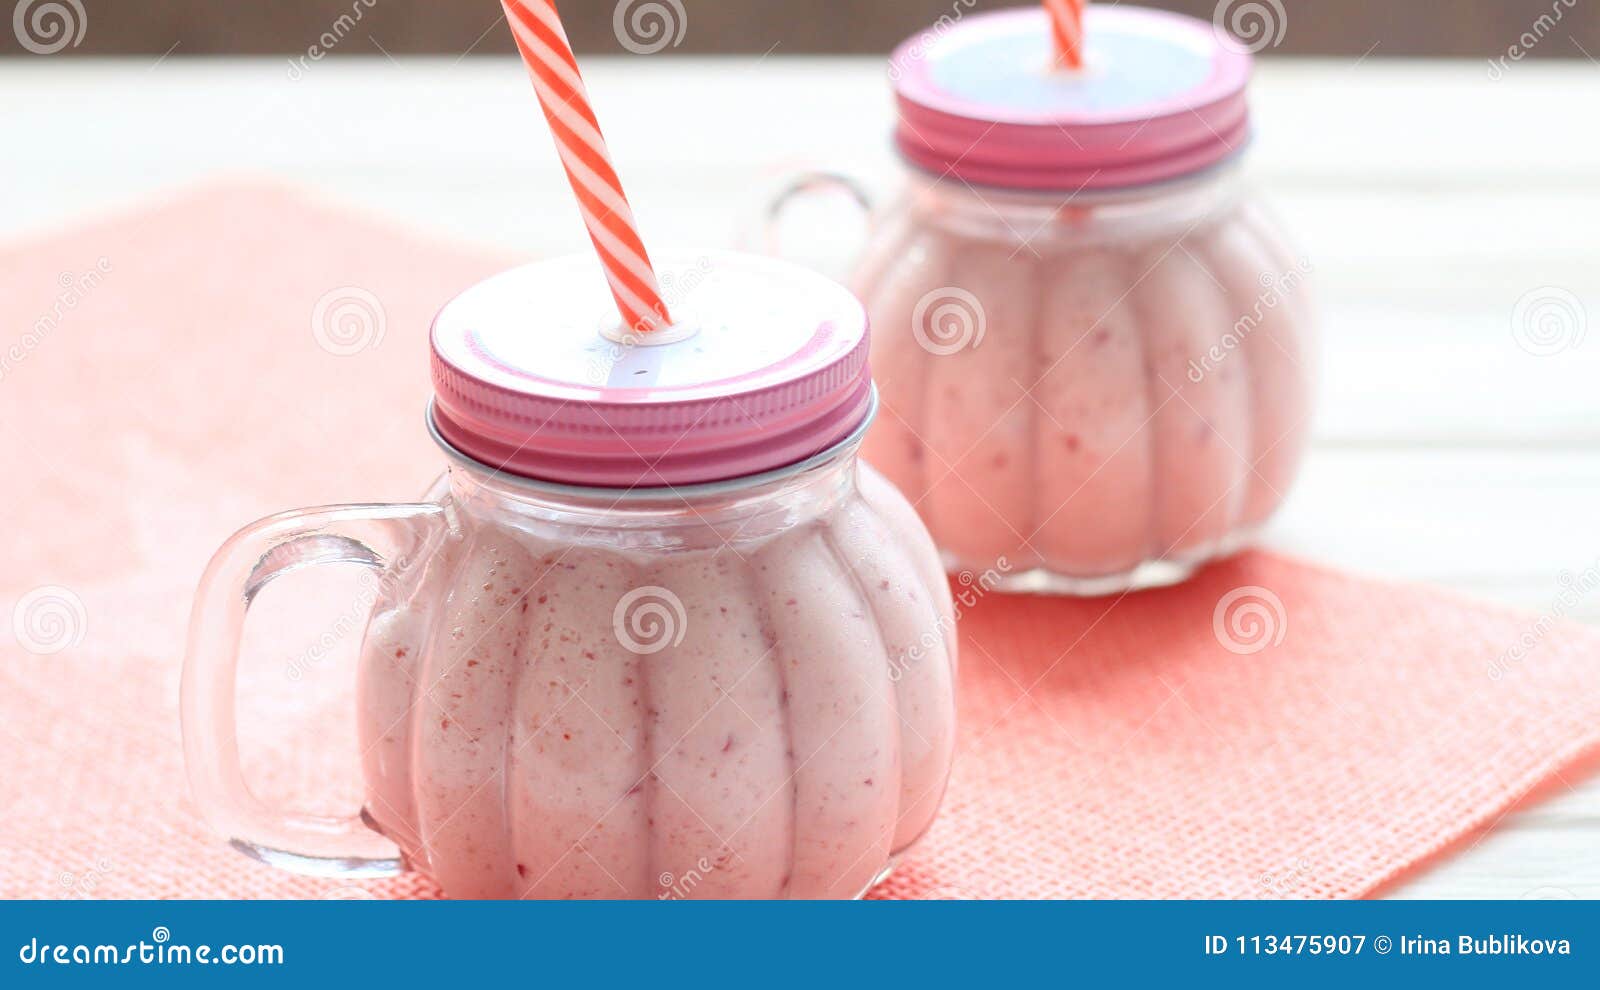 Healthy Strawberry Smoothie In A Mason A Jar Mug Stock Image Image Of Healthy Dairy 113475907 